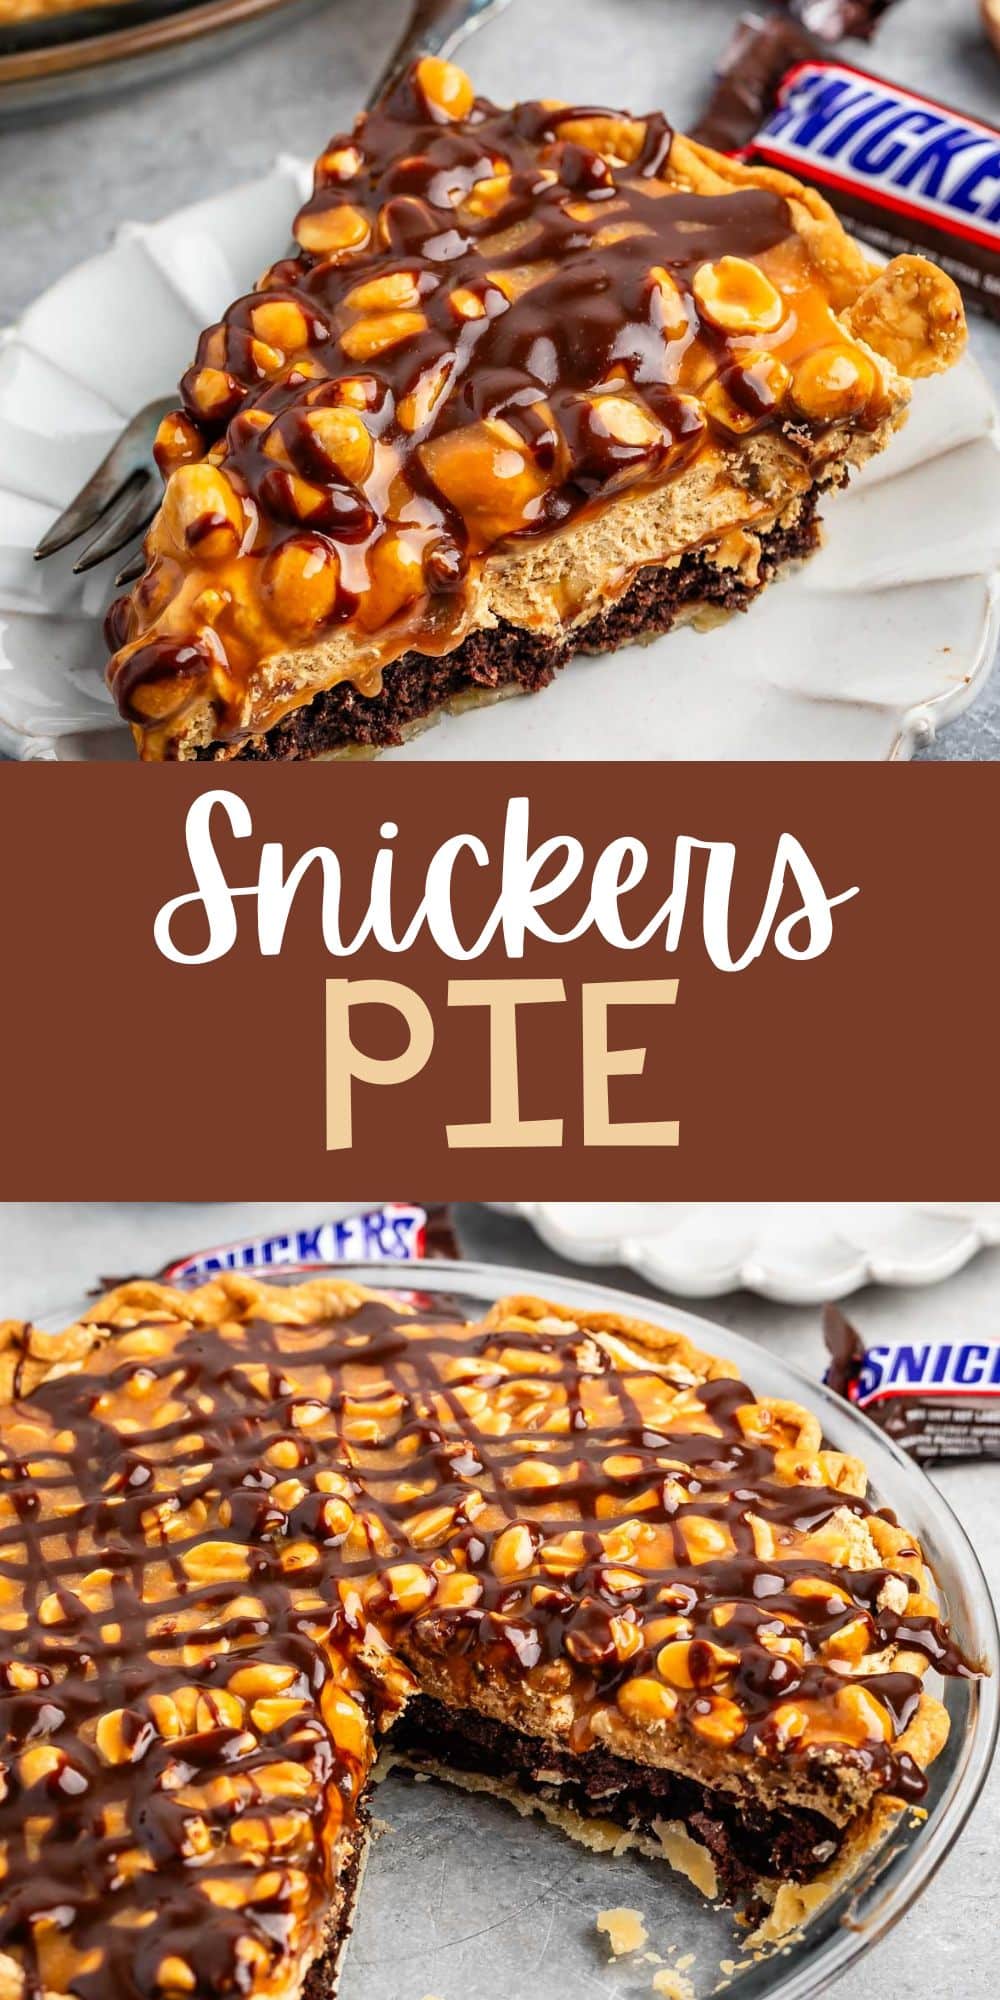 two photos of sliced snickers pie with nuts and chocolate sauce on top with words on the image.